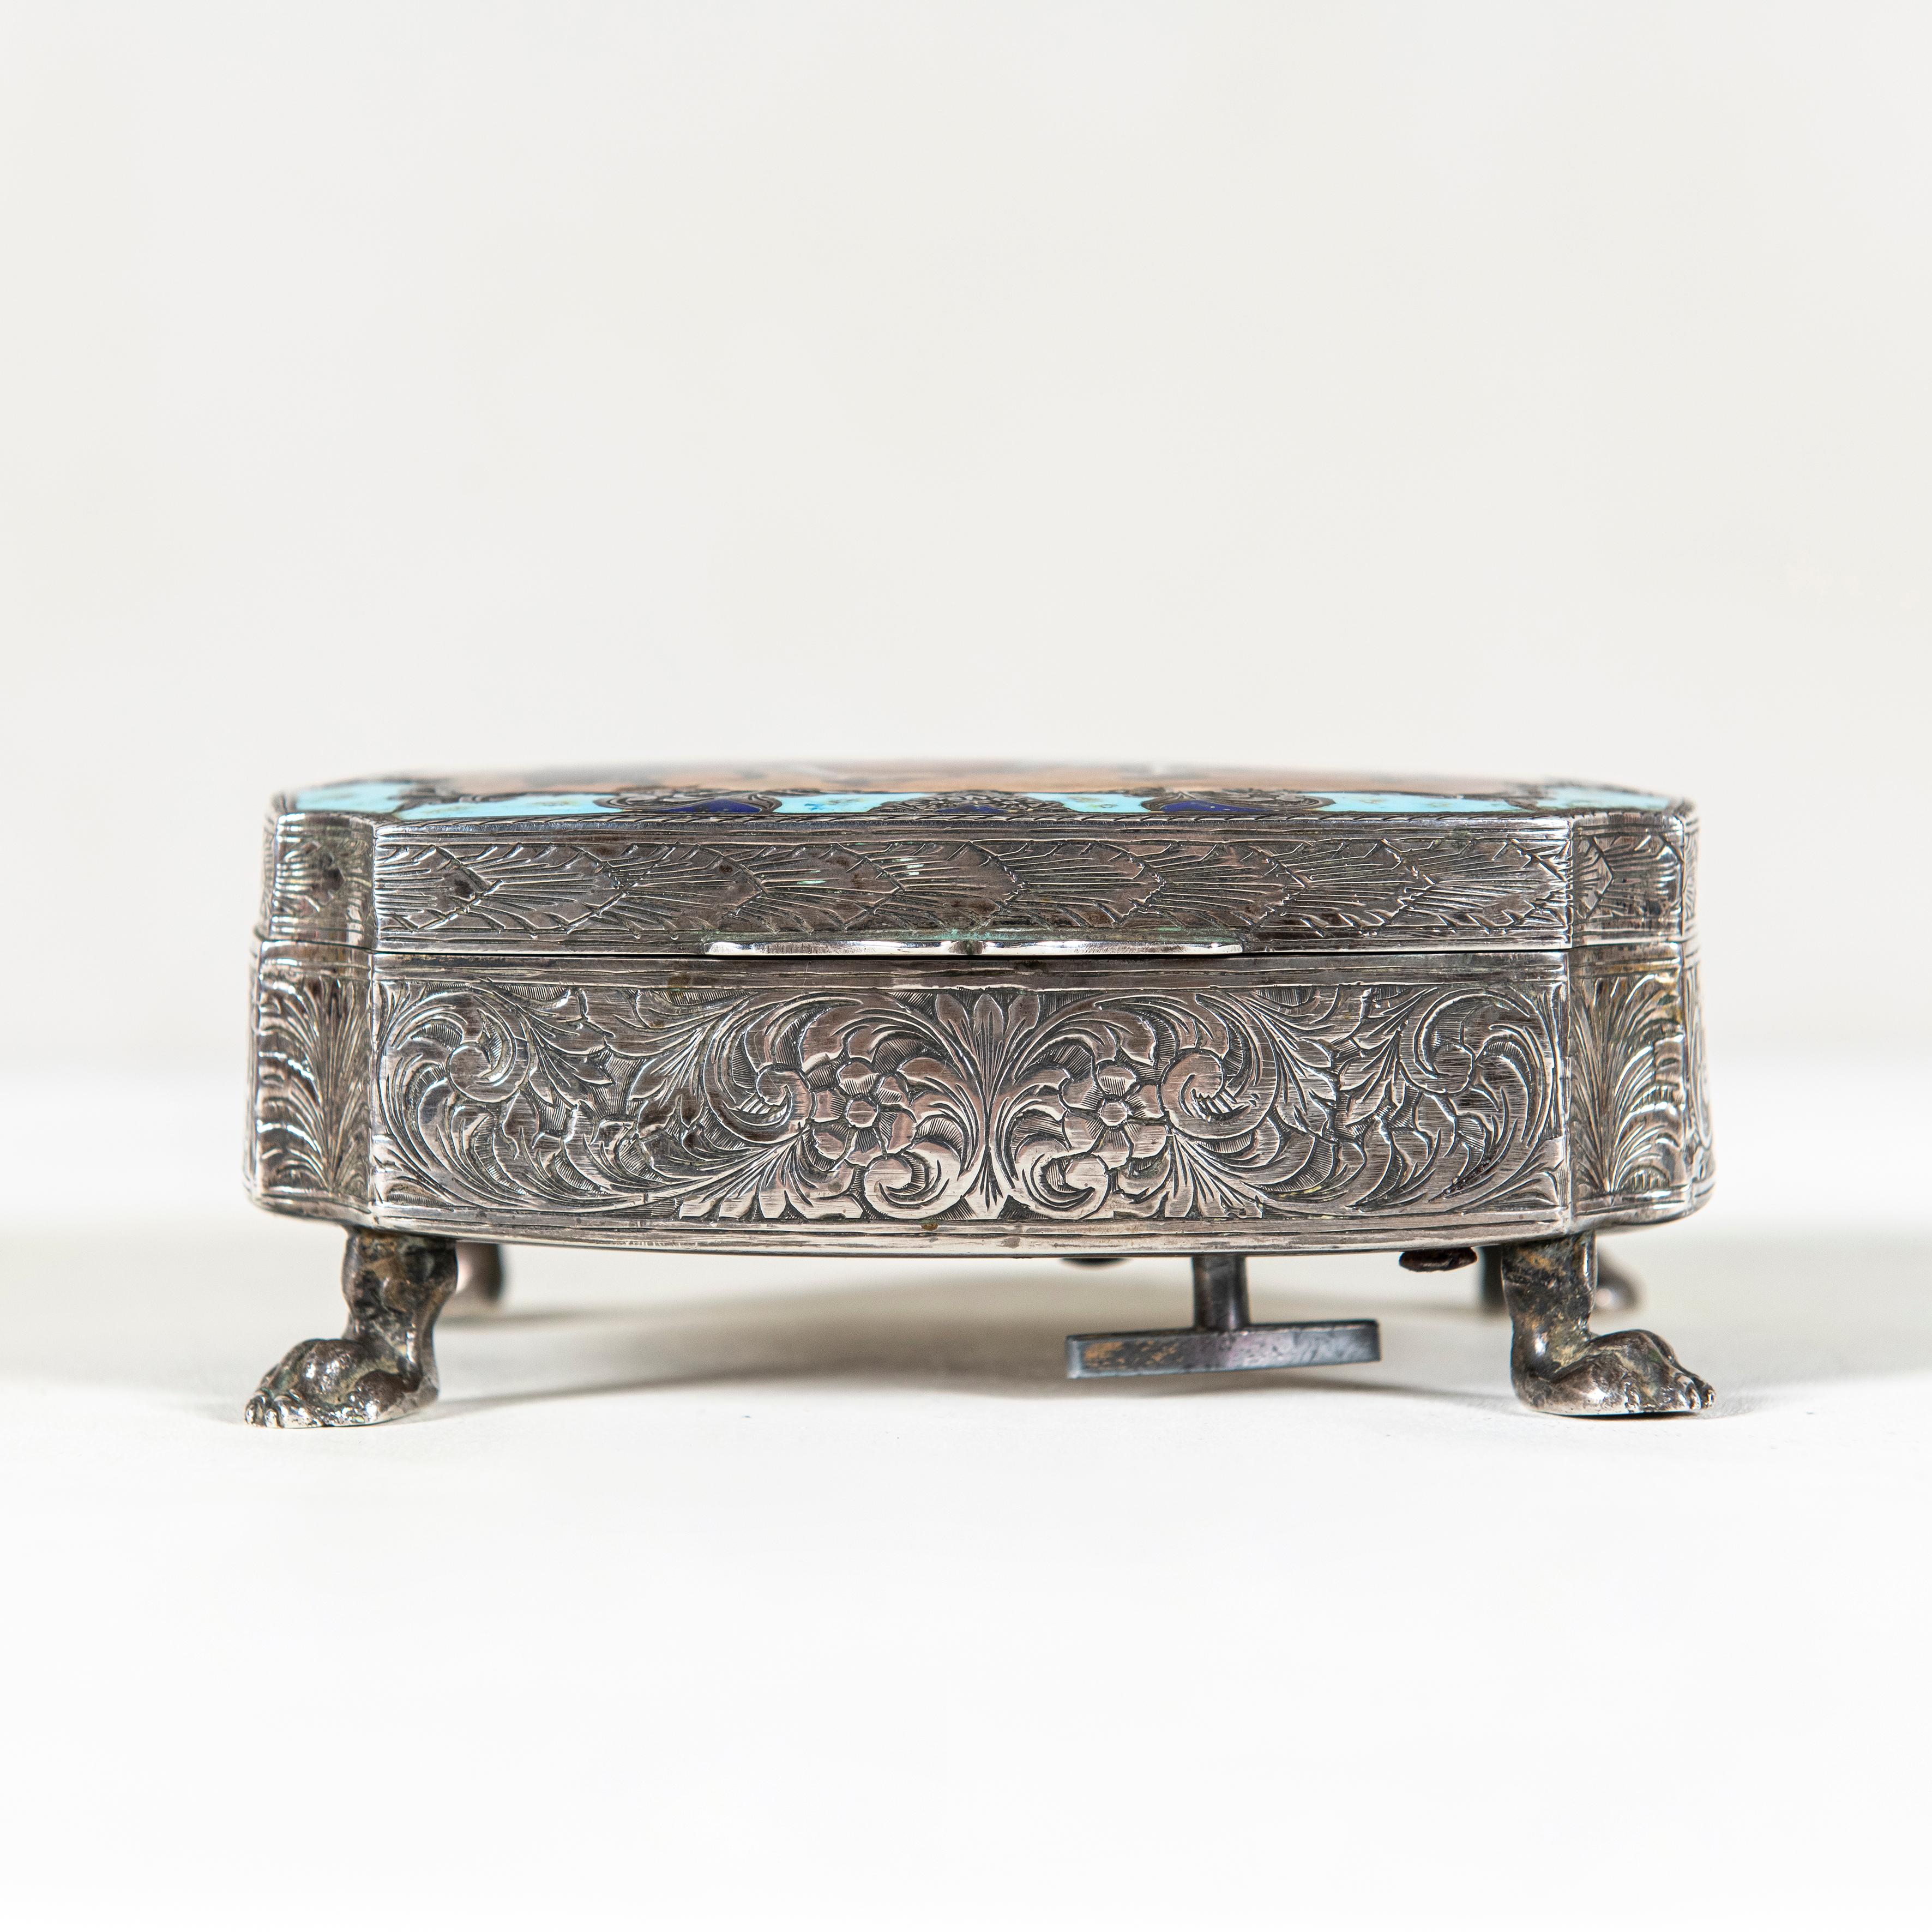 Neoclassical Silver 800 and Enamel Music Box Signed Fallaci Firenze, Italy, circa 1930 For Sale